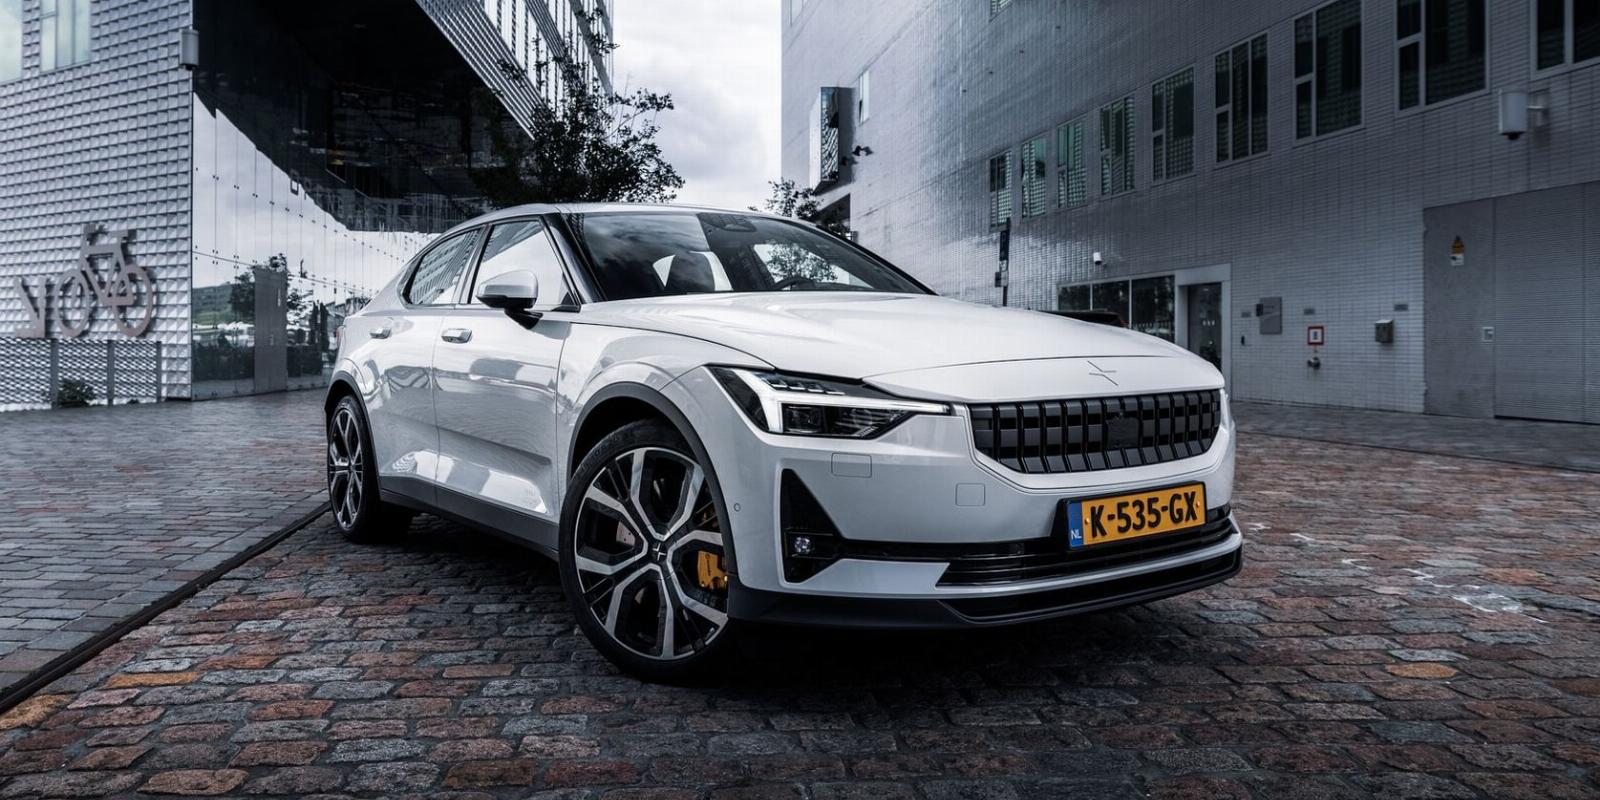 What Is Polestar? What EV Models Does It Sell?